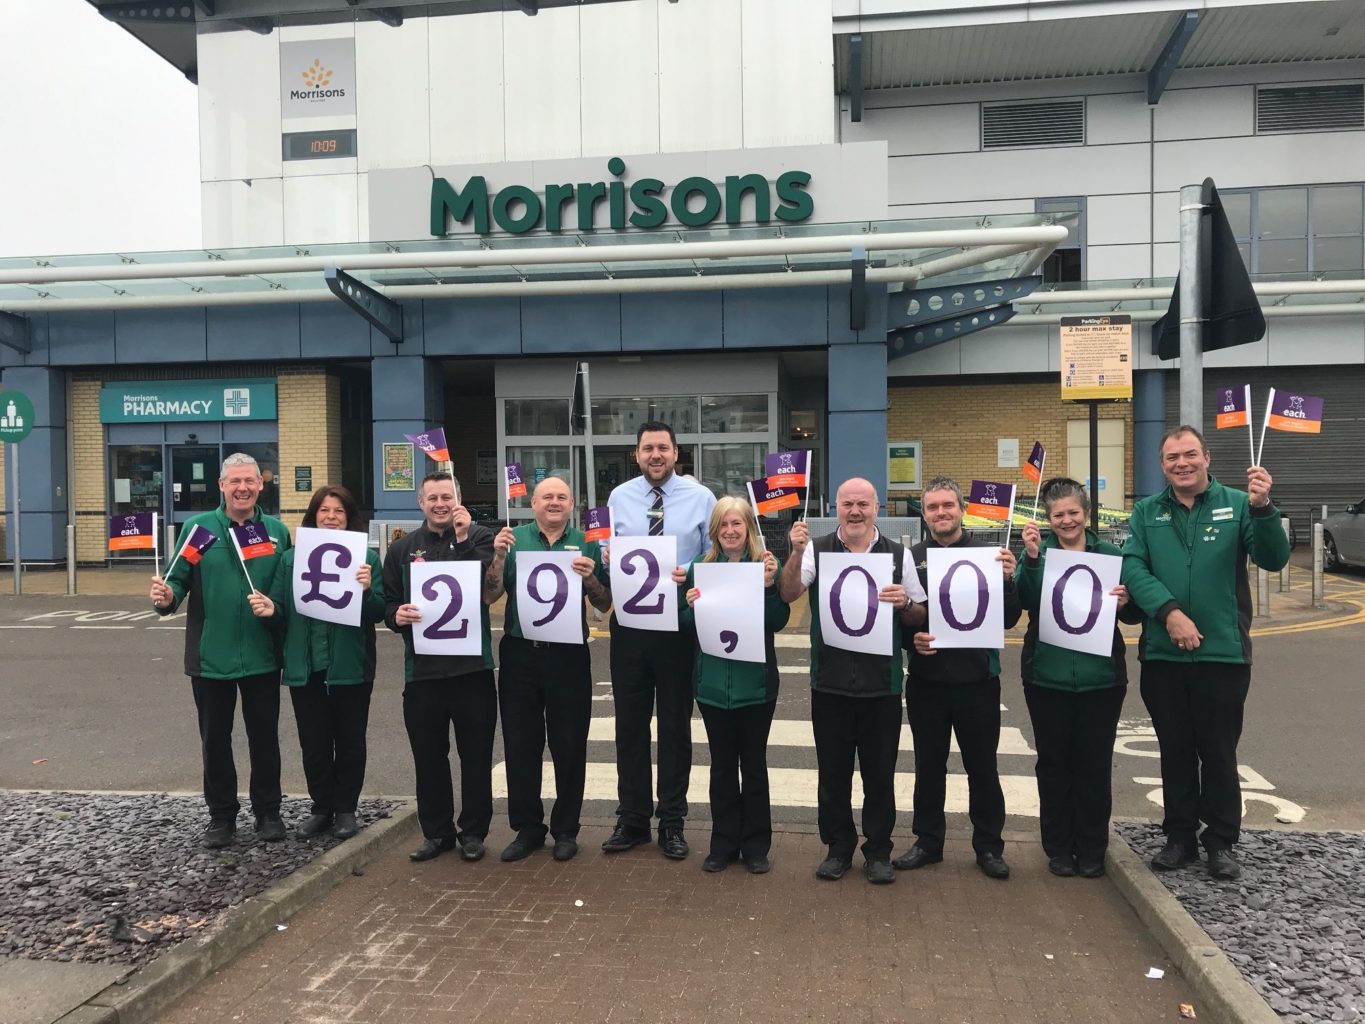 Morrisons staff fundraising for EACH